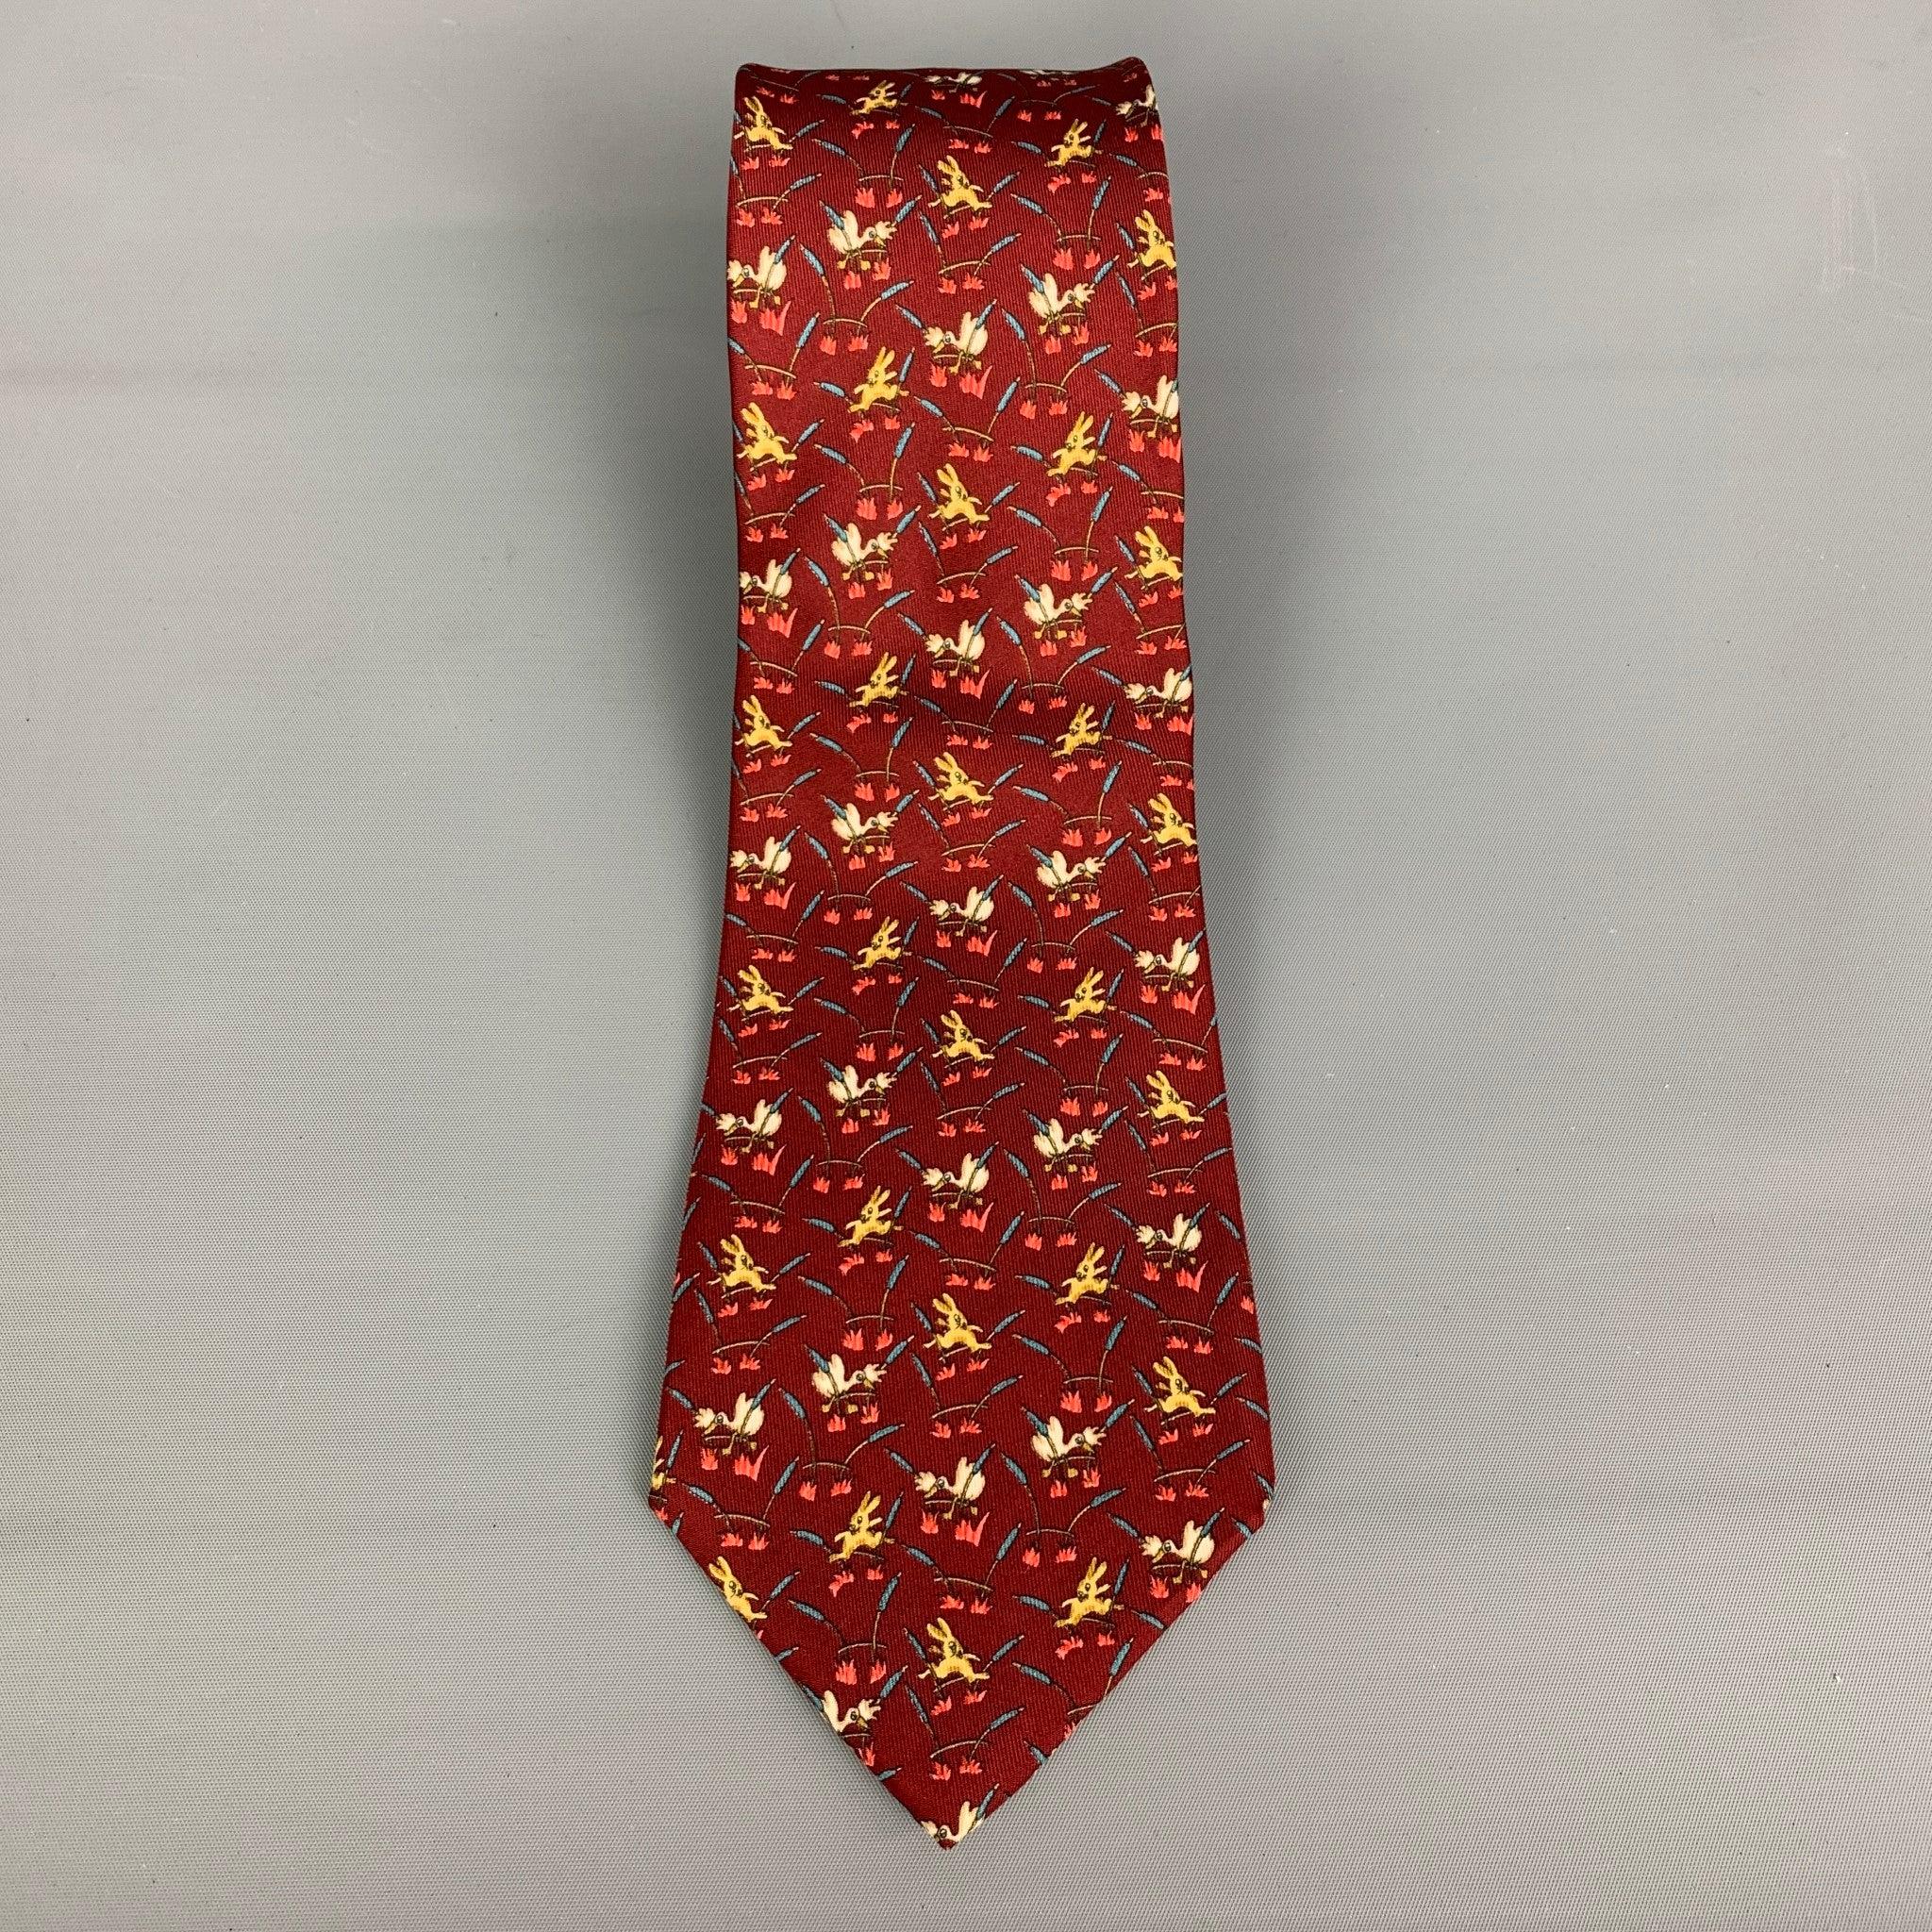 SALVATORE FERRAGAMO necktie comes in burgundy rabbit printed silk material. Made in Italy.Excellent Pre-Owned Condition. Width: 4 inches Length: 60 inches  
 

 

  
  
  
 Sui Generis Reference: 119634
 Category: Tie
 More Details
  
 Brand: